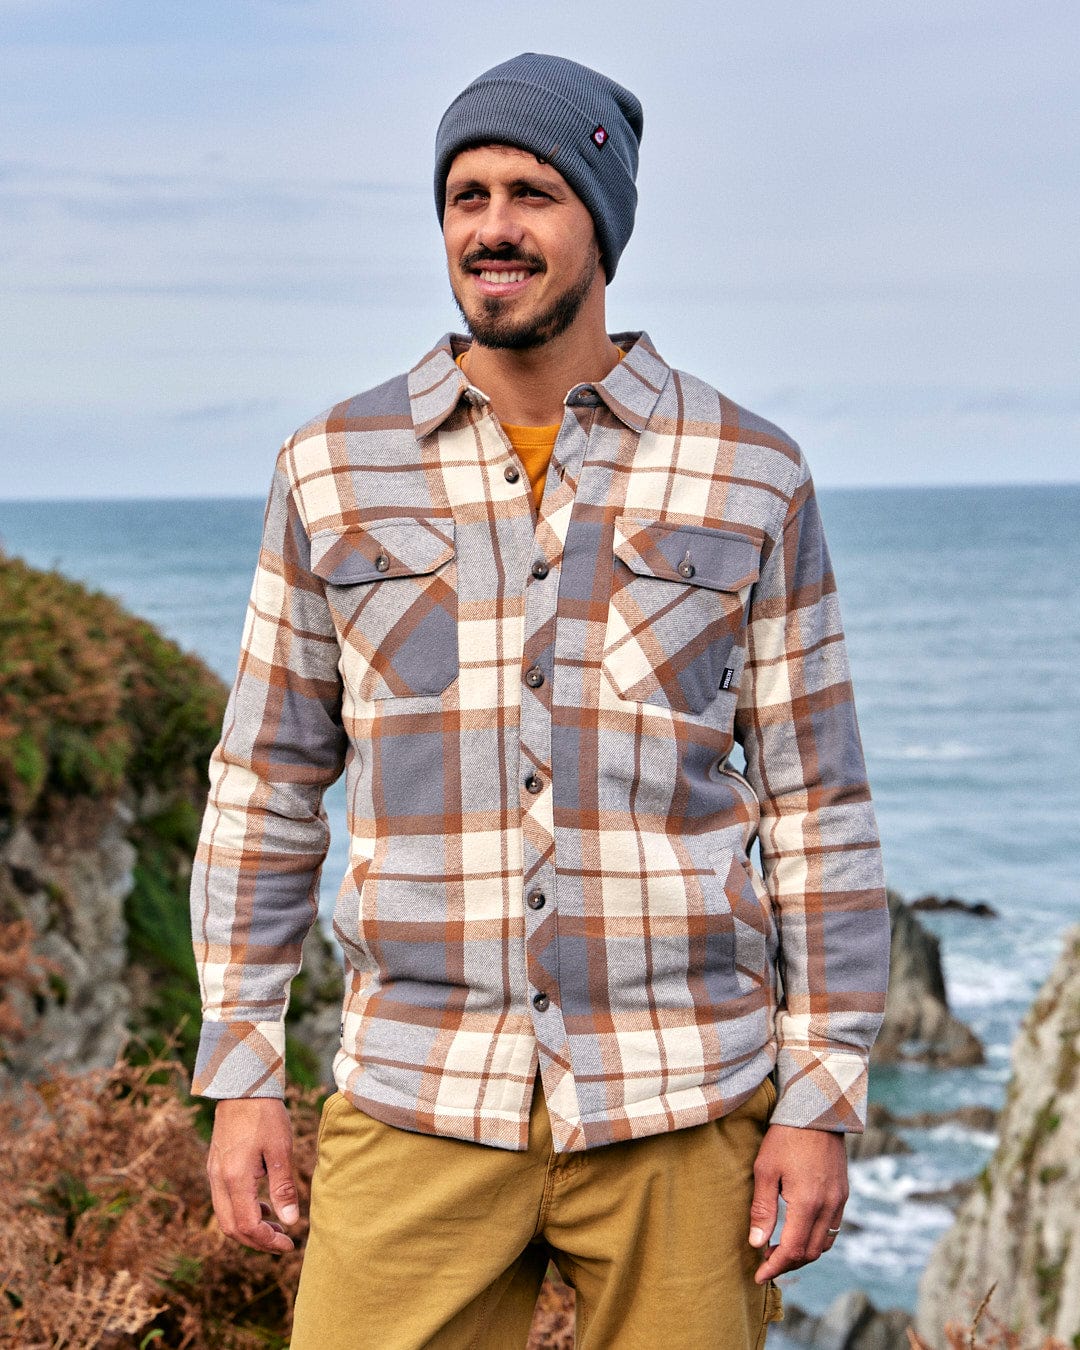 A stylish man wearing a Saltrock Woody - Mens Sherpa Lined Shacket - Brown and beanie standing by the ocean, looking warm and fashionable.